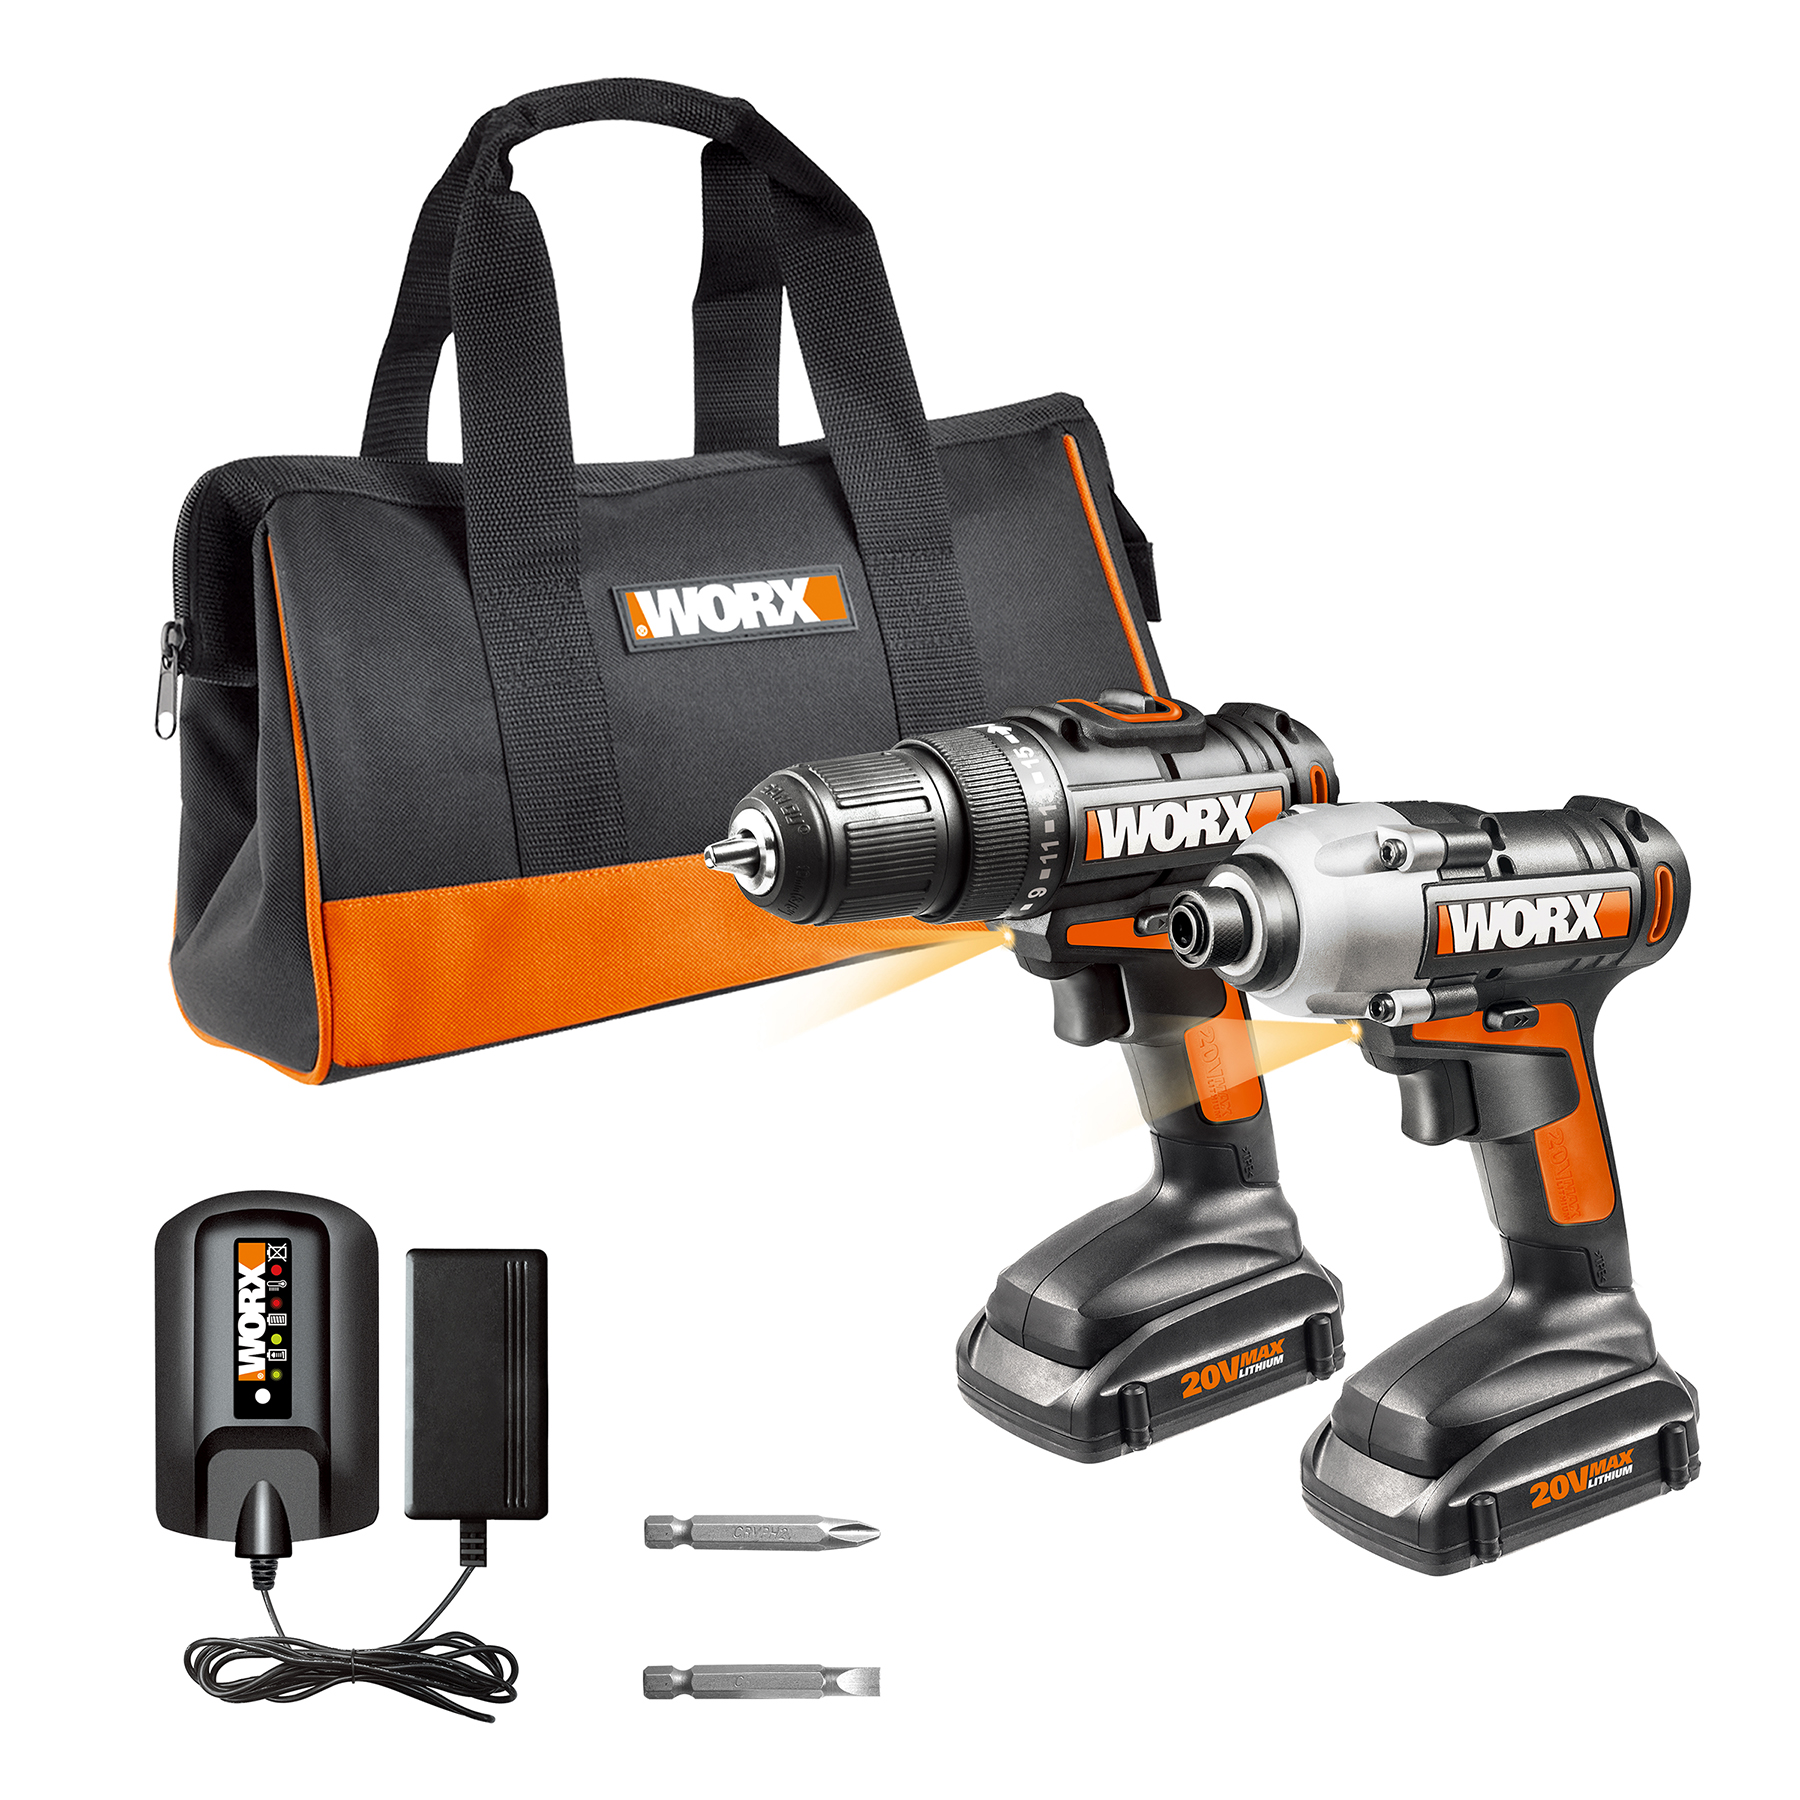 Besides the WORX 20V Drill & Driver and WORX 20V Impact Driver, the combo kit includes two, 20V MAX Lithium batteries, a 5-hr. battery charger, two screwdriver bits and a carrying case.